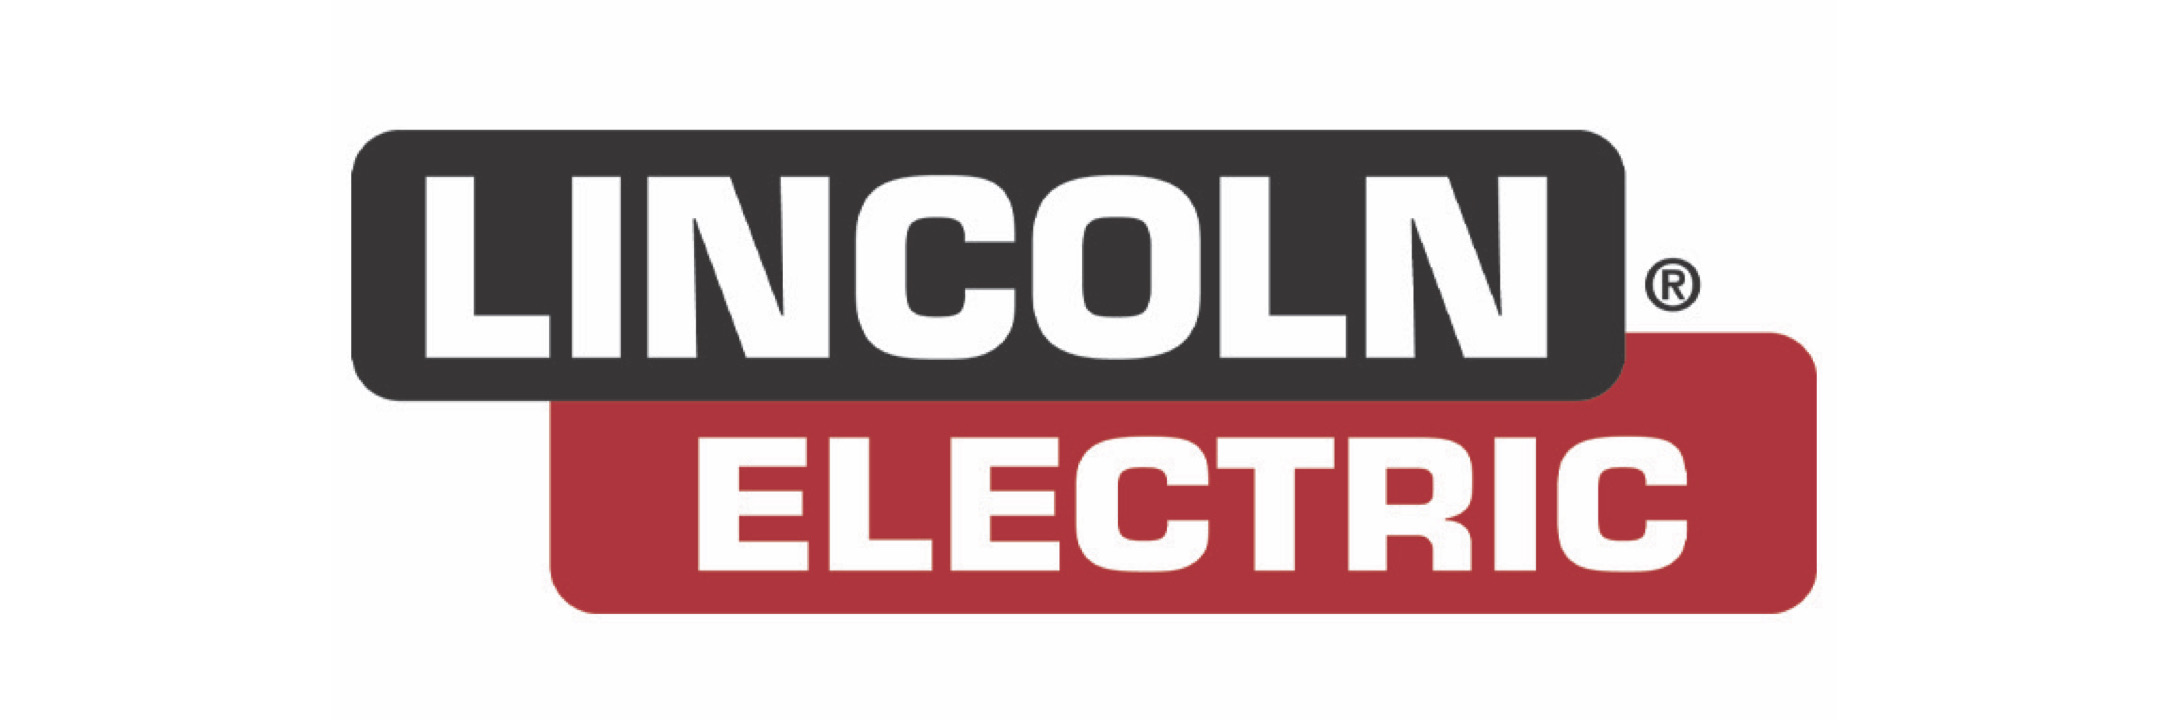 lincoln electric